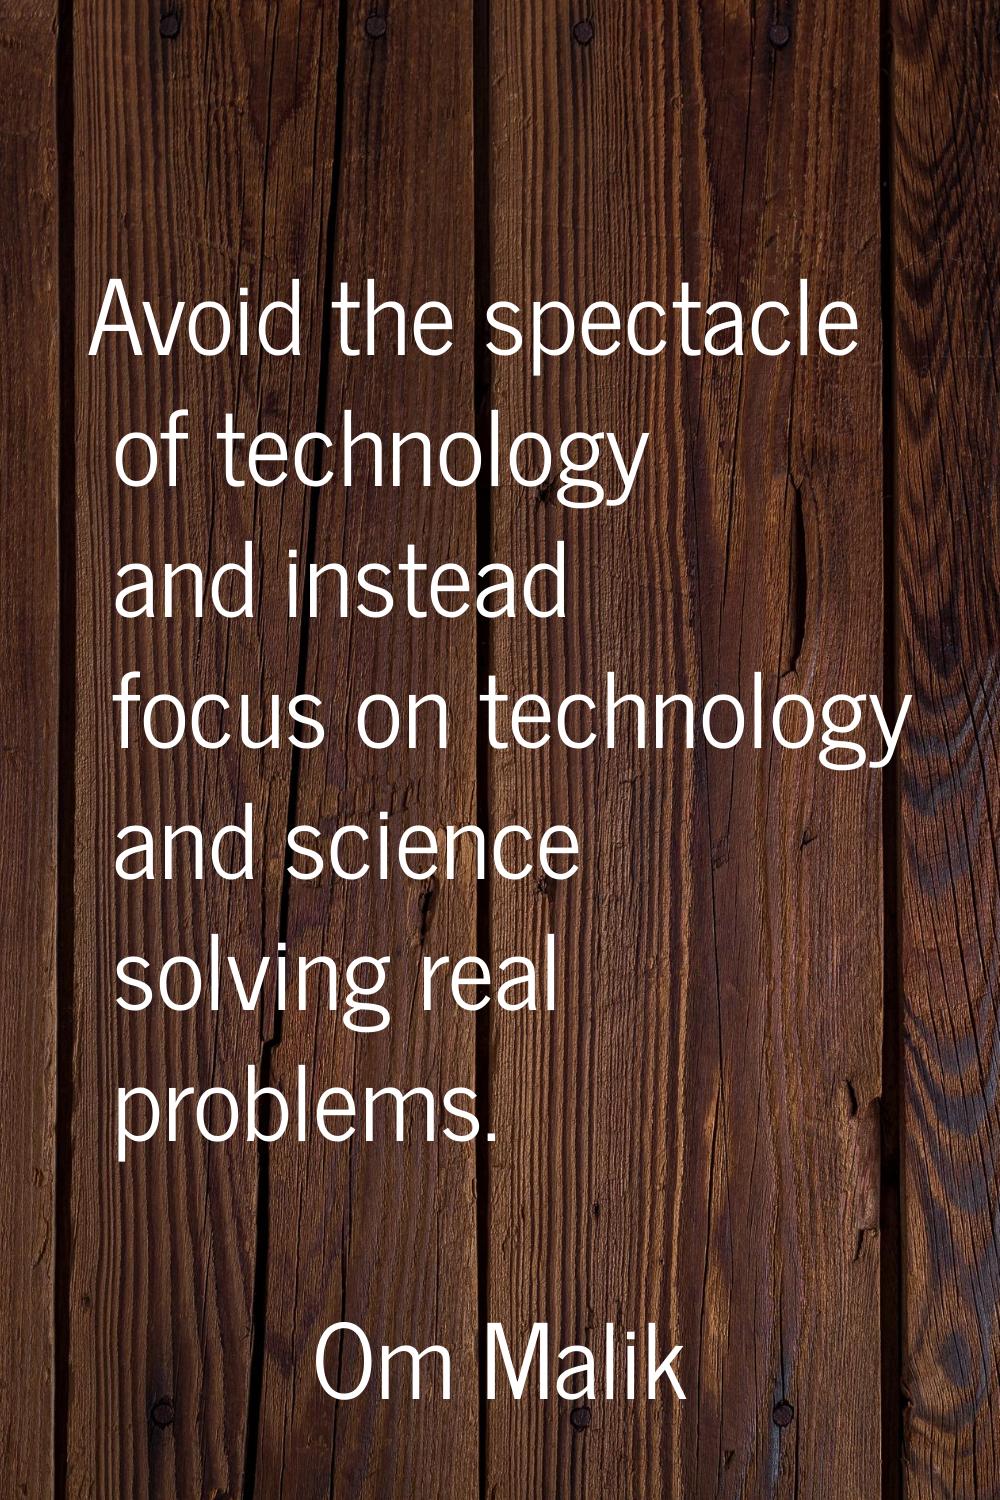 Avoid the spectacle of technology and instead focus on technology and science solving real problems